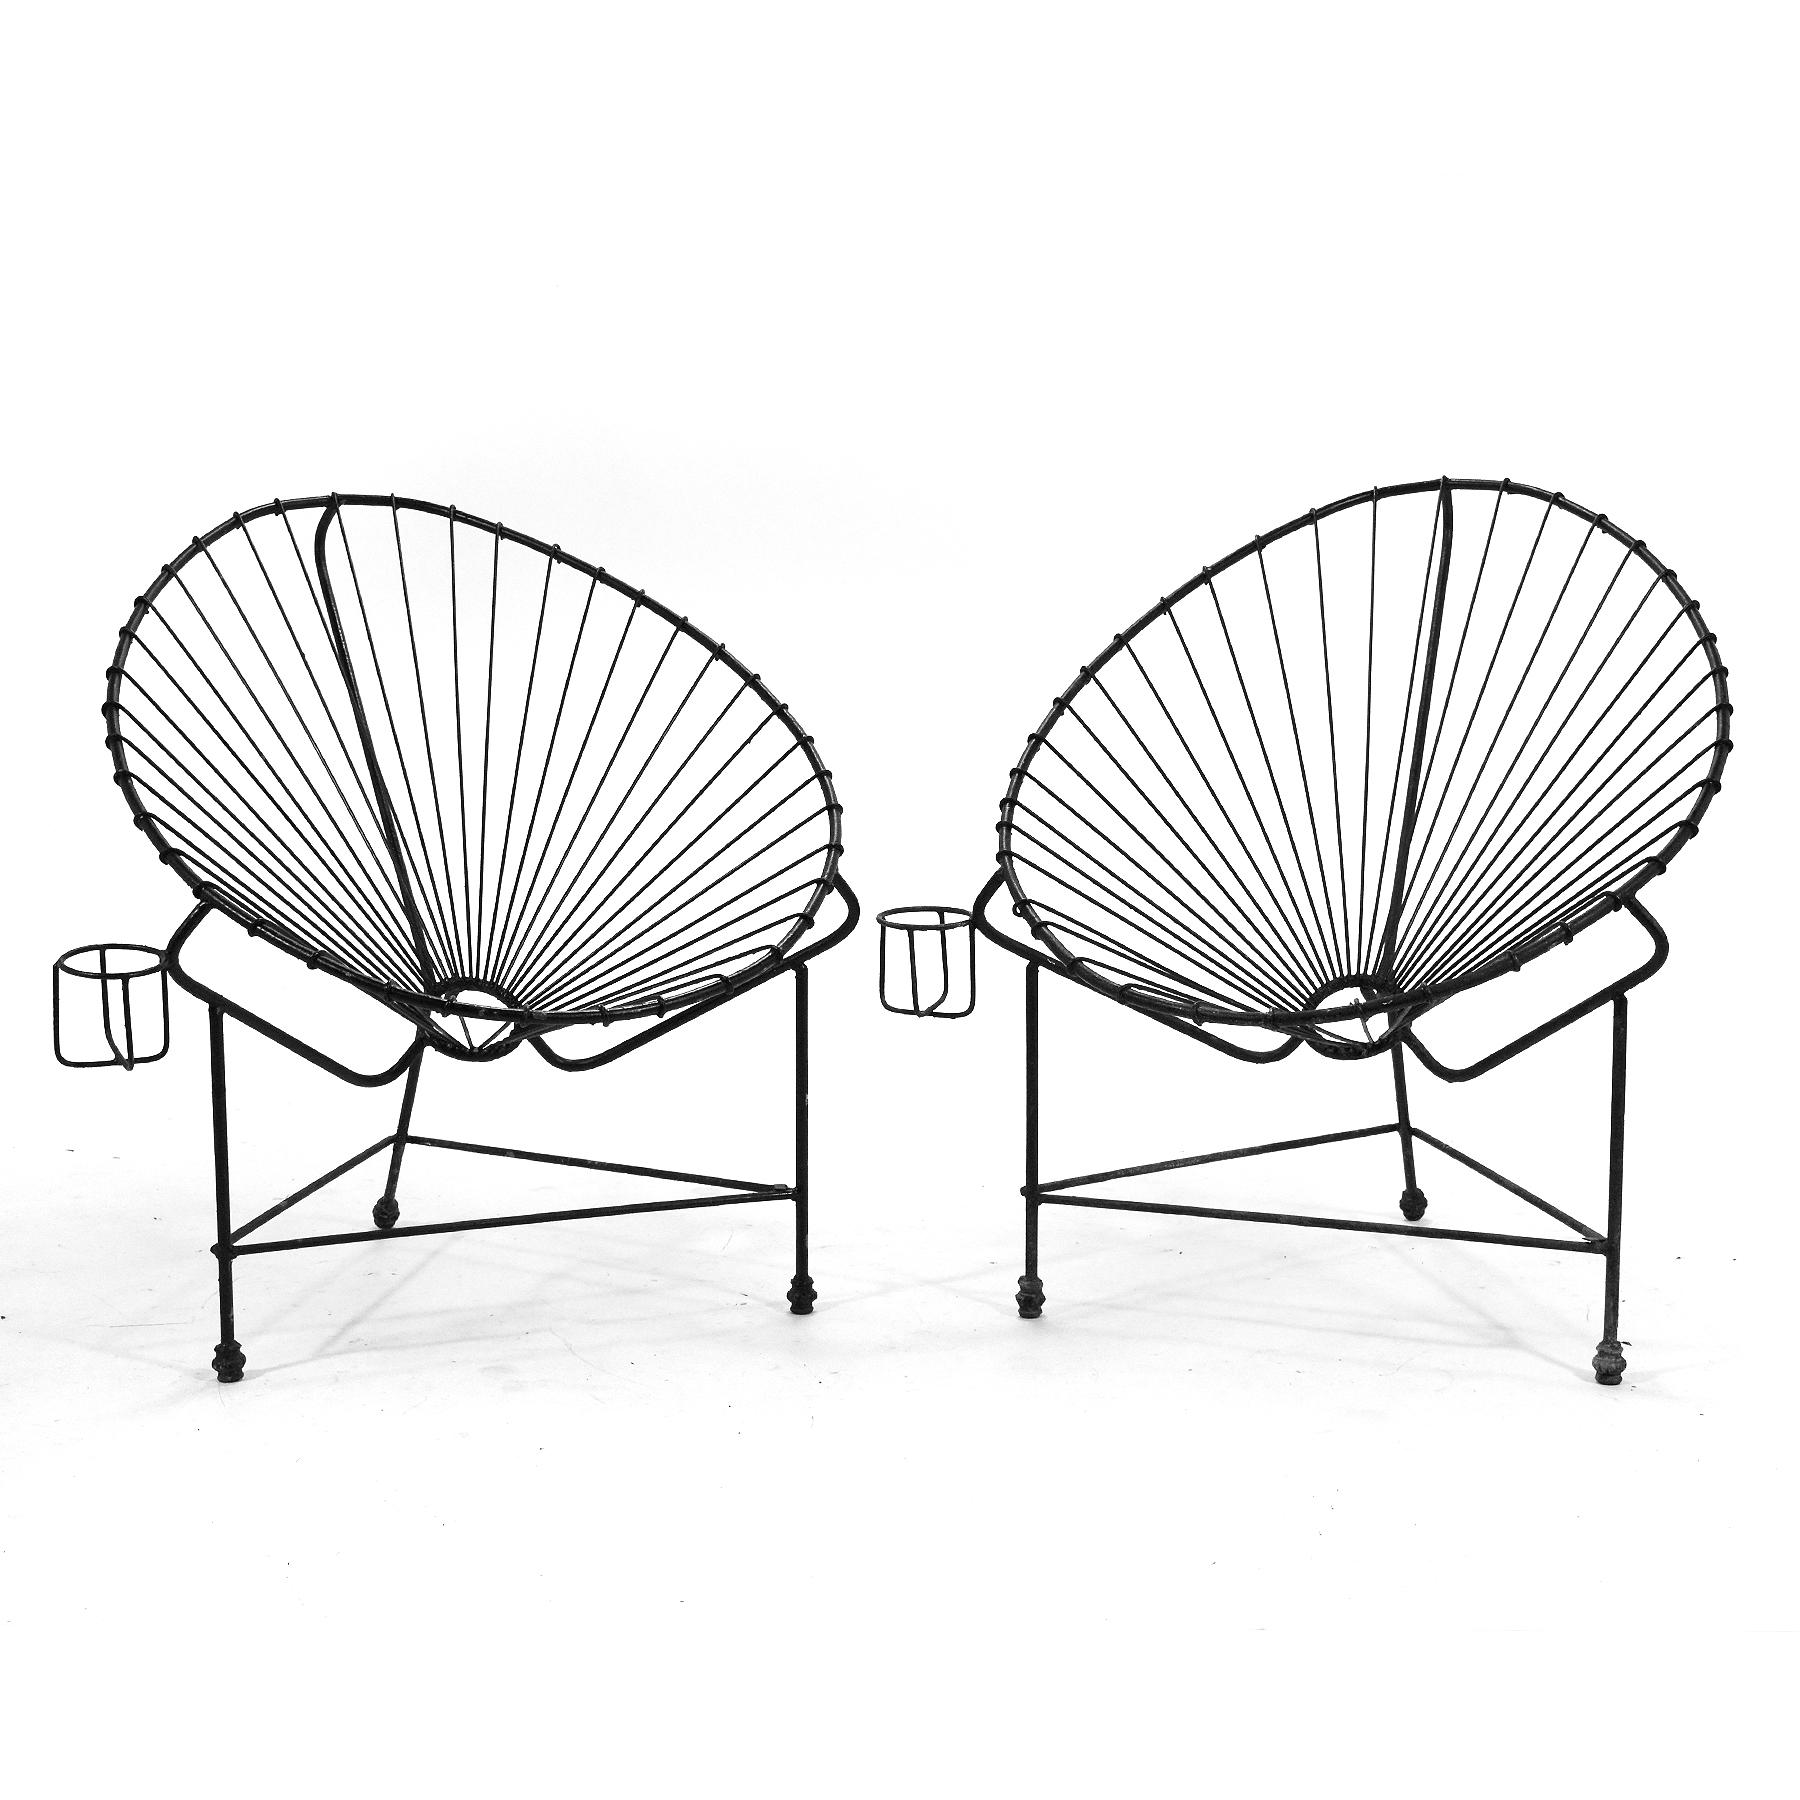 A iconic Mexican modern design, the Acapulco Chair is a light, breezy chair perfect for the patio, poolside, or the beach. This striking vintage pair is uncommon for their fixed wire rod supports rather than nylon cord, their attached cup holders,